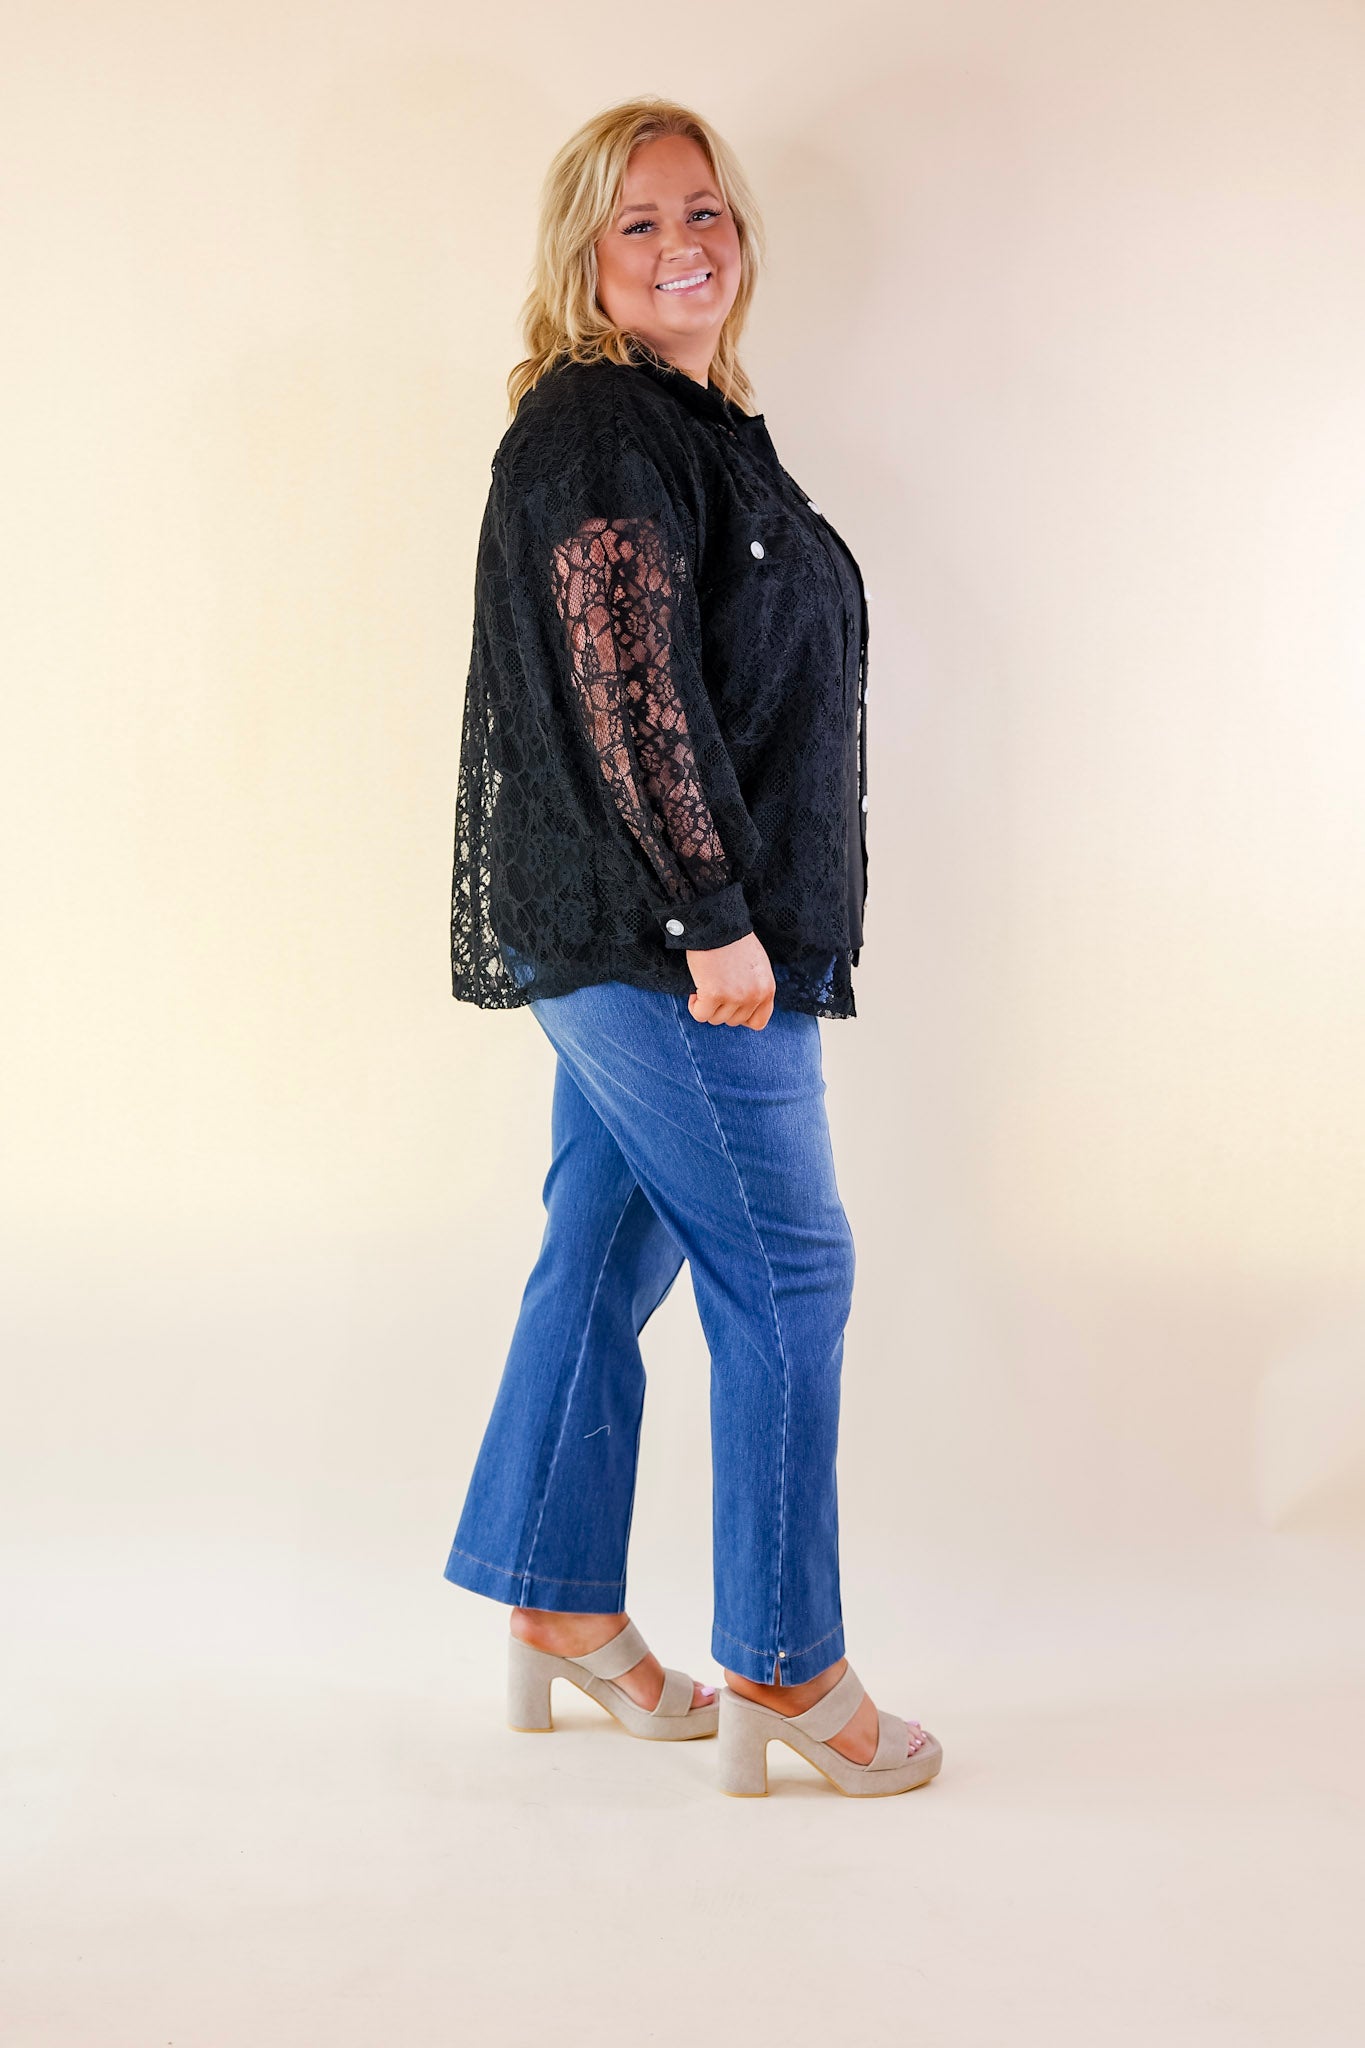 Sheer Chic Collared Button Up Lace Top in Black - Giddy Up Glamour Boutique